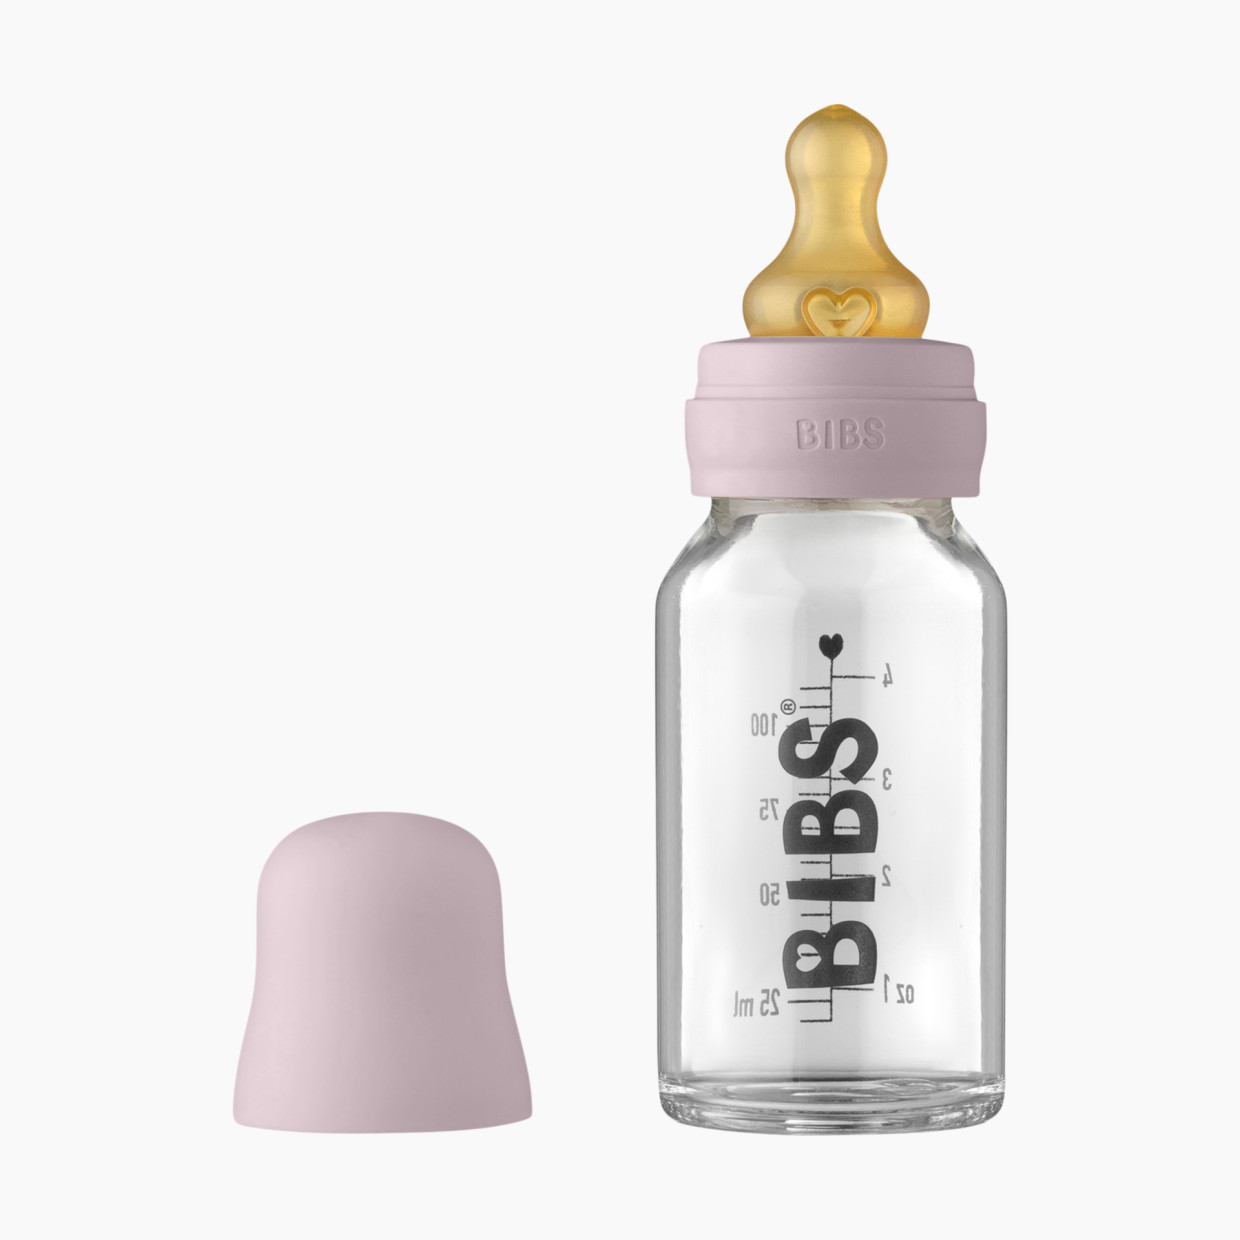 BIBS Baby Glass Bottle Complete Set with Natural Rubber Nipple - Dusky Lilac, 110ml.